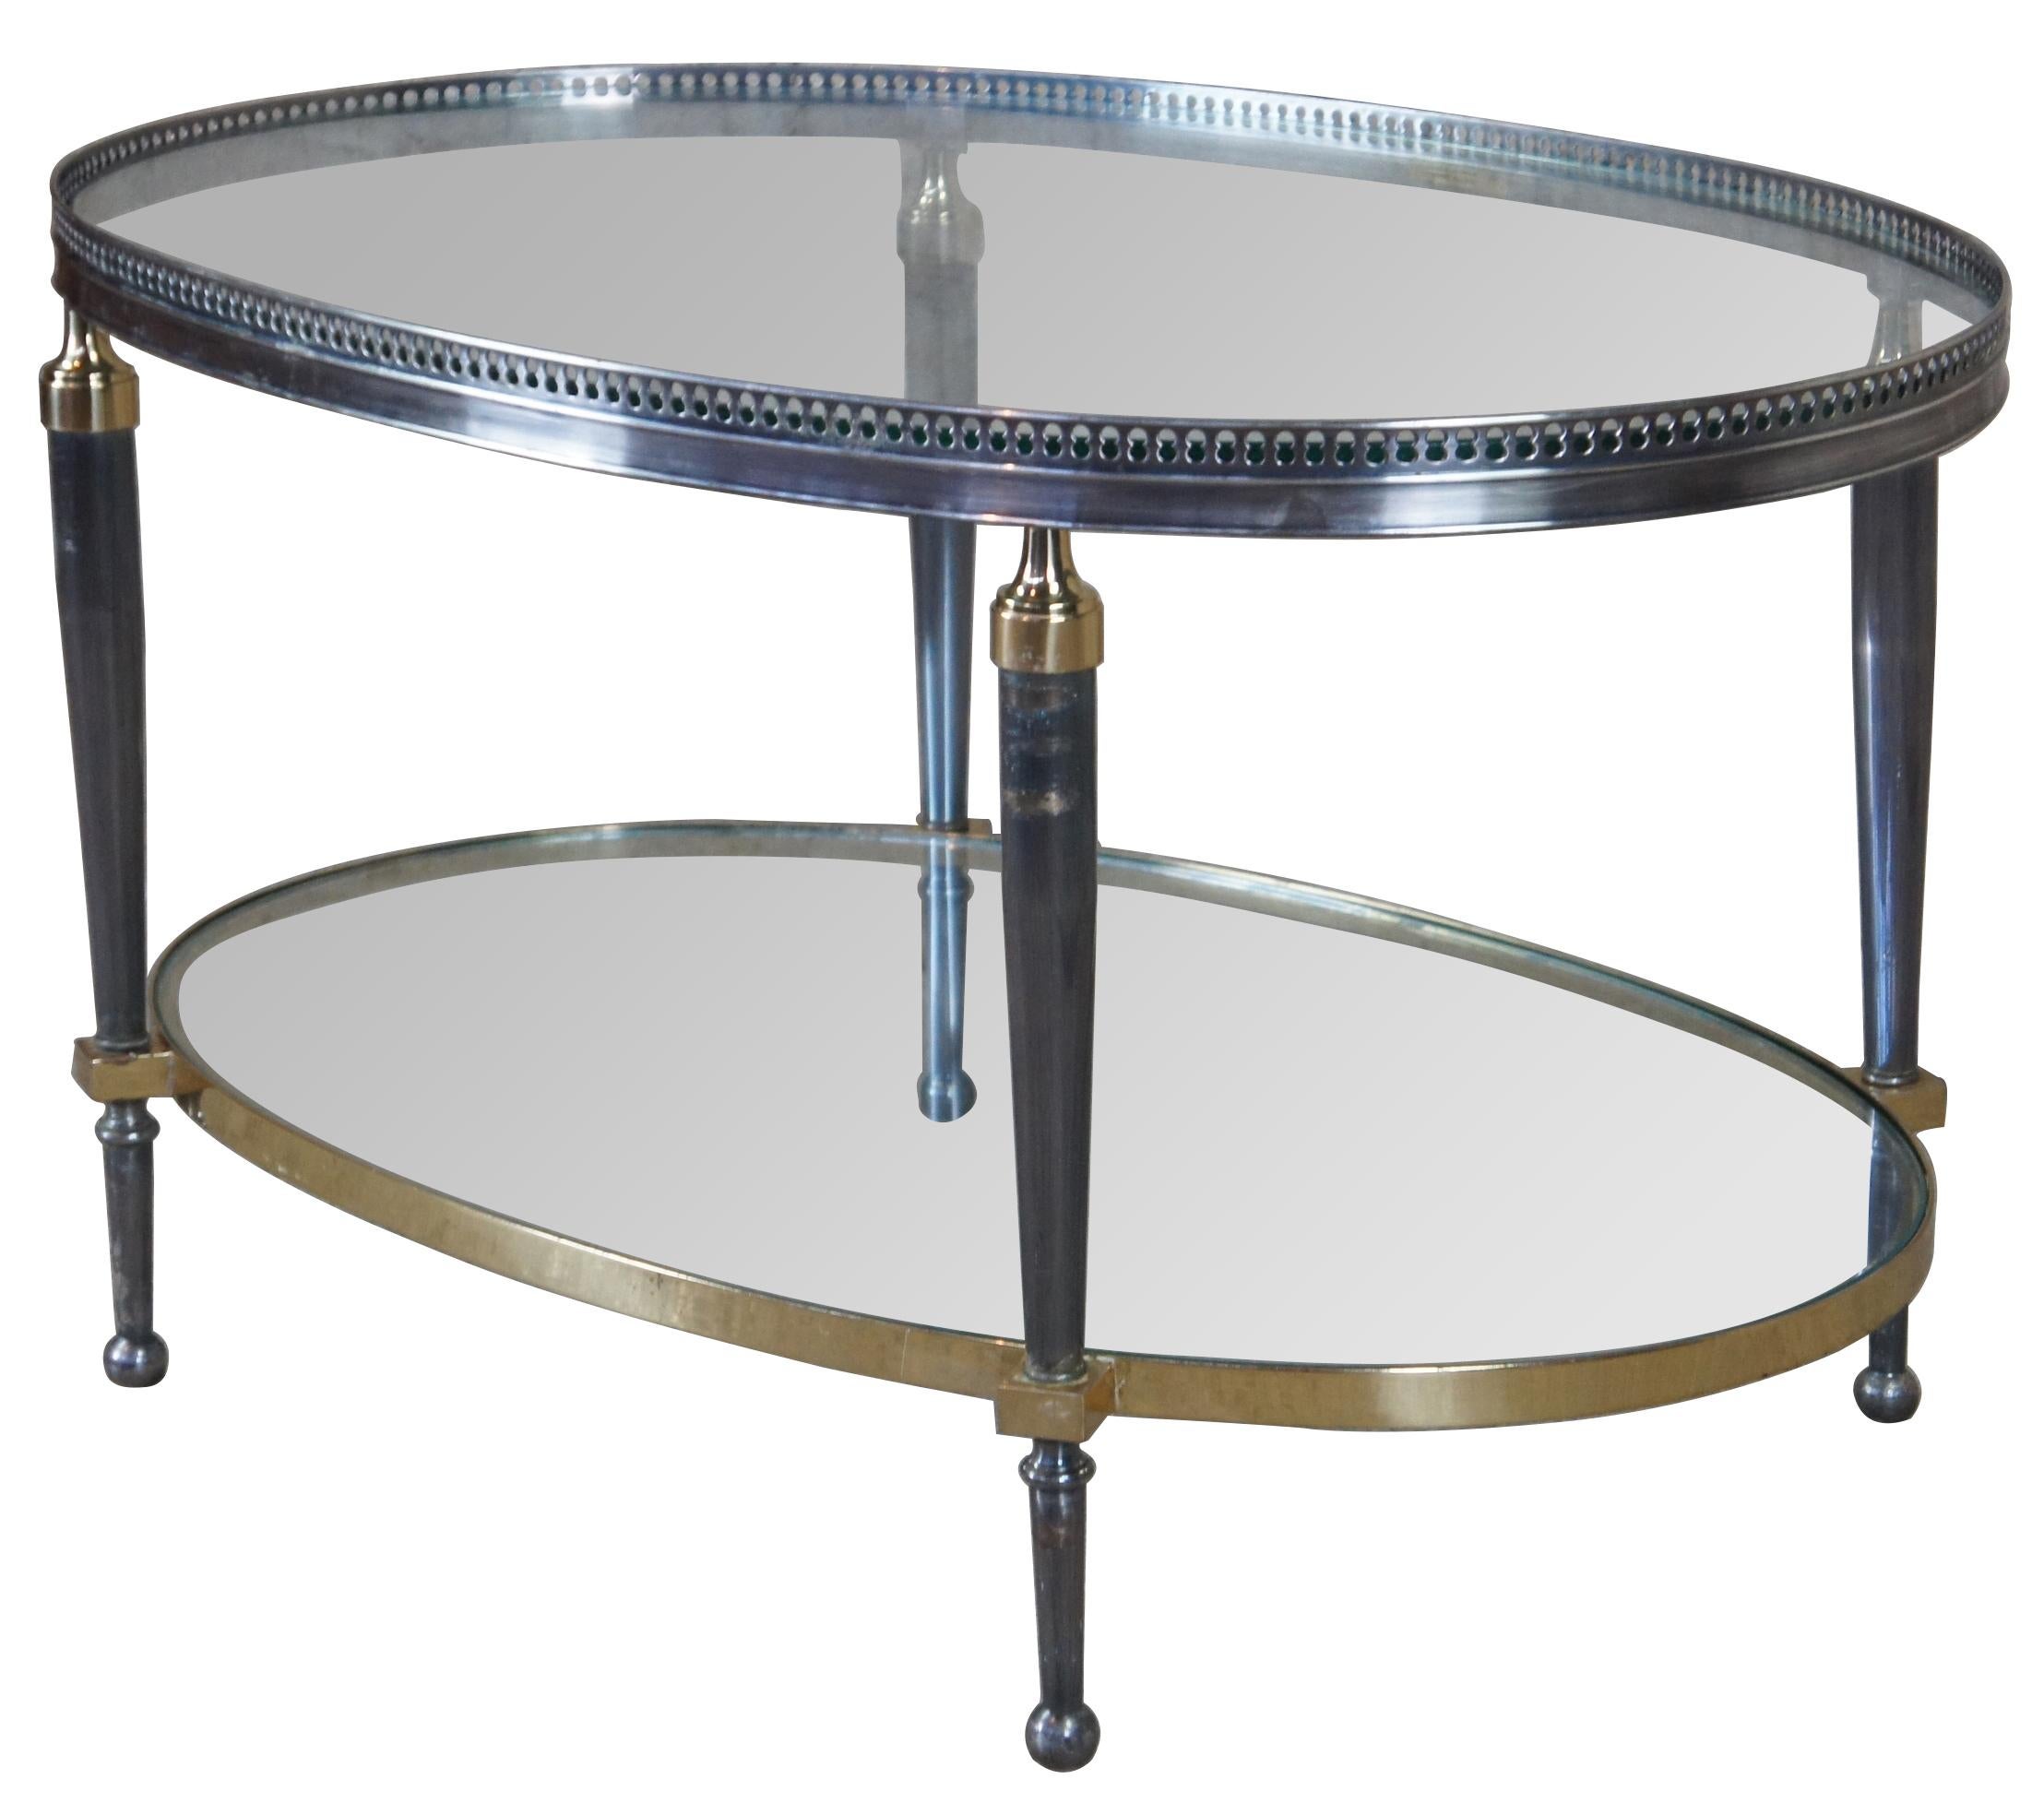 Late 20th century oval form coffee table by Trouvailles Inc of Watertown, Ma. Made from steel and brass with glass inserts. Features a pierced gallery and tapered legs leading to ball feet.
 